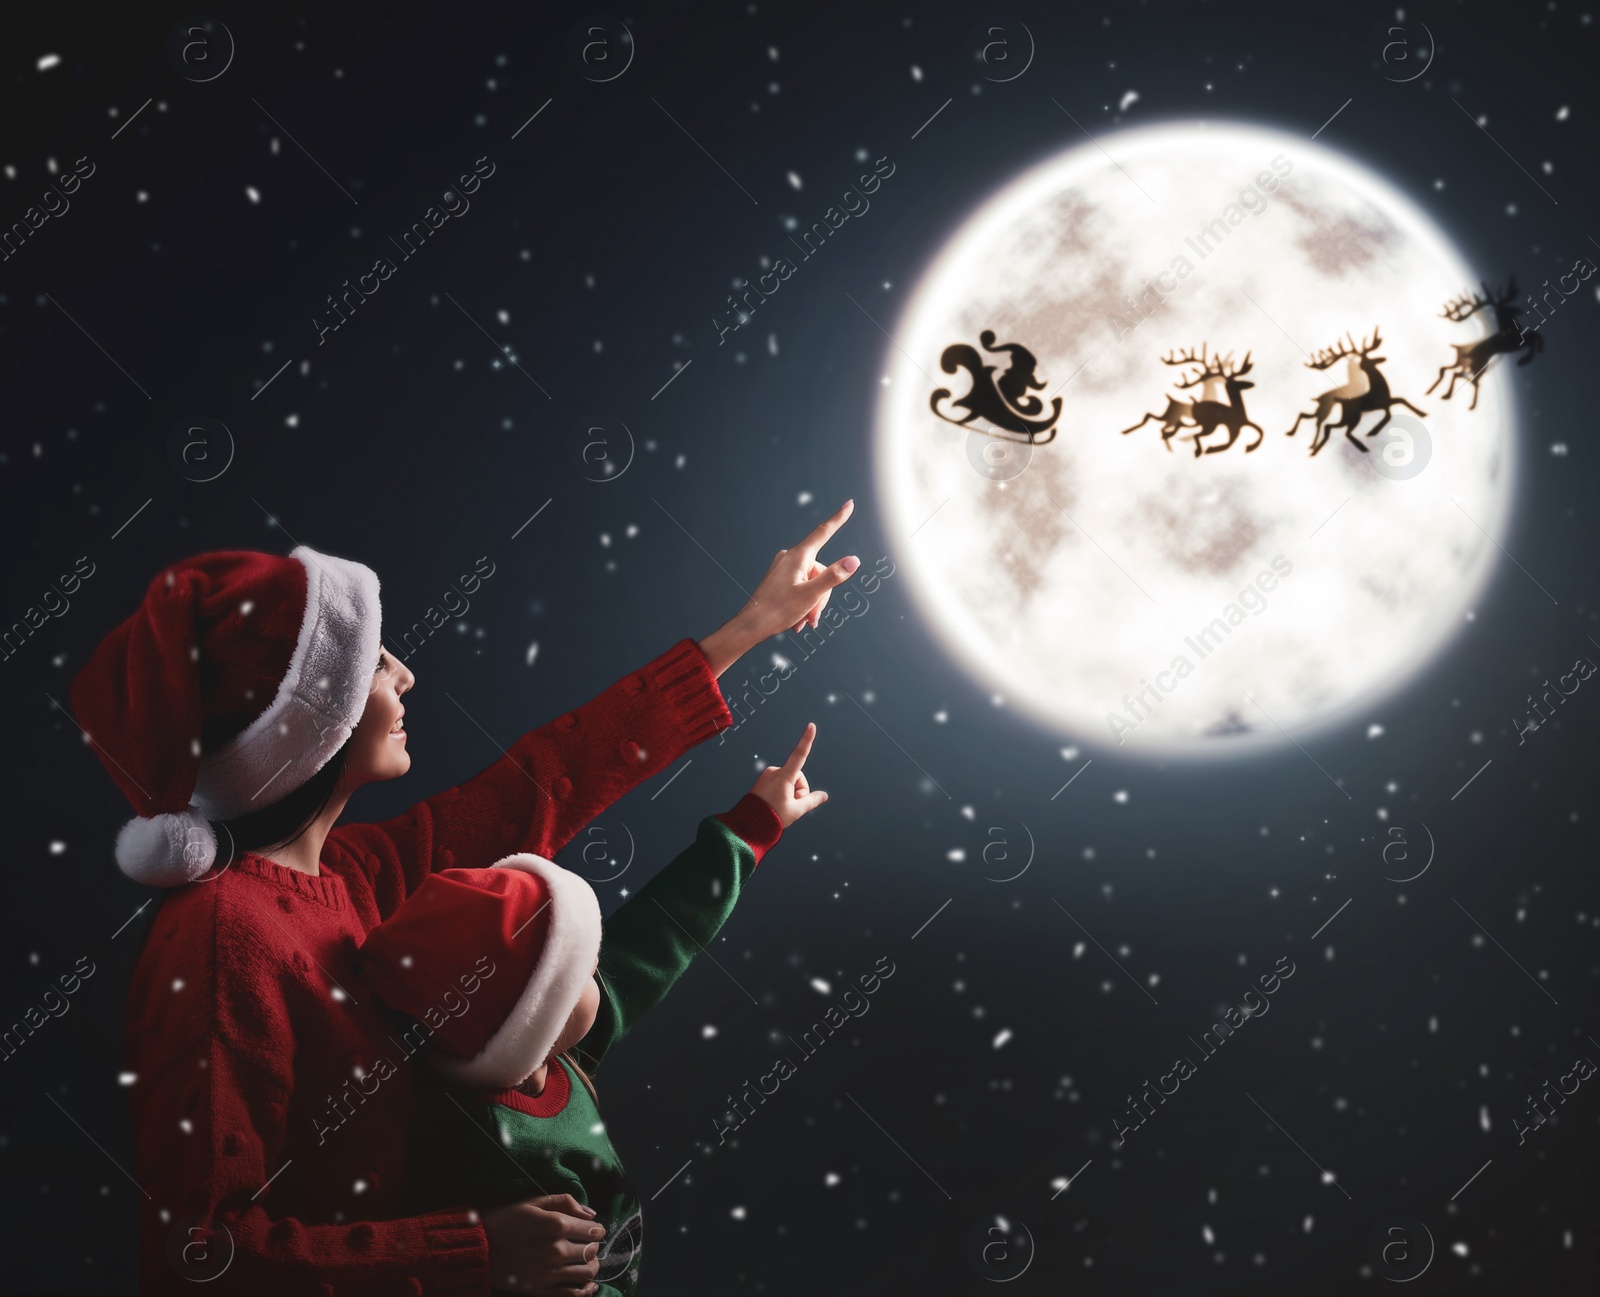 Image of Mother and her little daughter looking at Santa Claus with reindeers in sky on full moon night. Christmas holiday